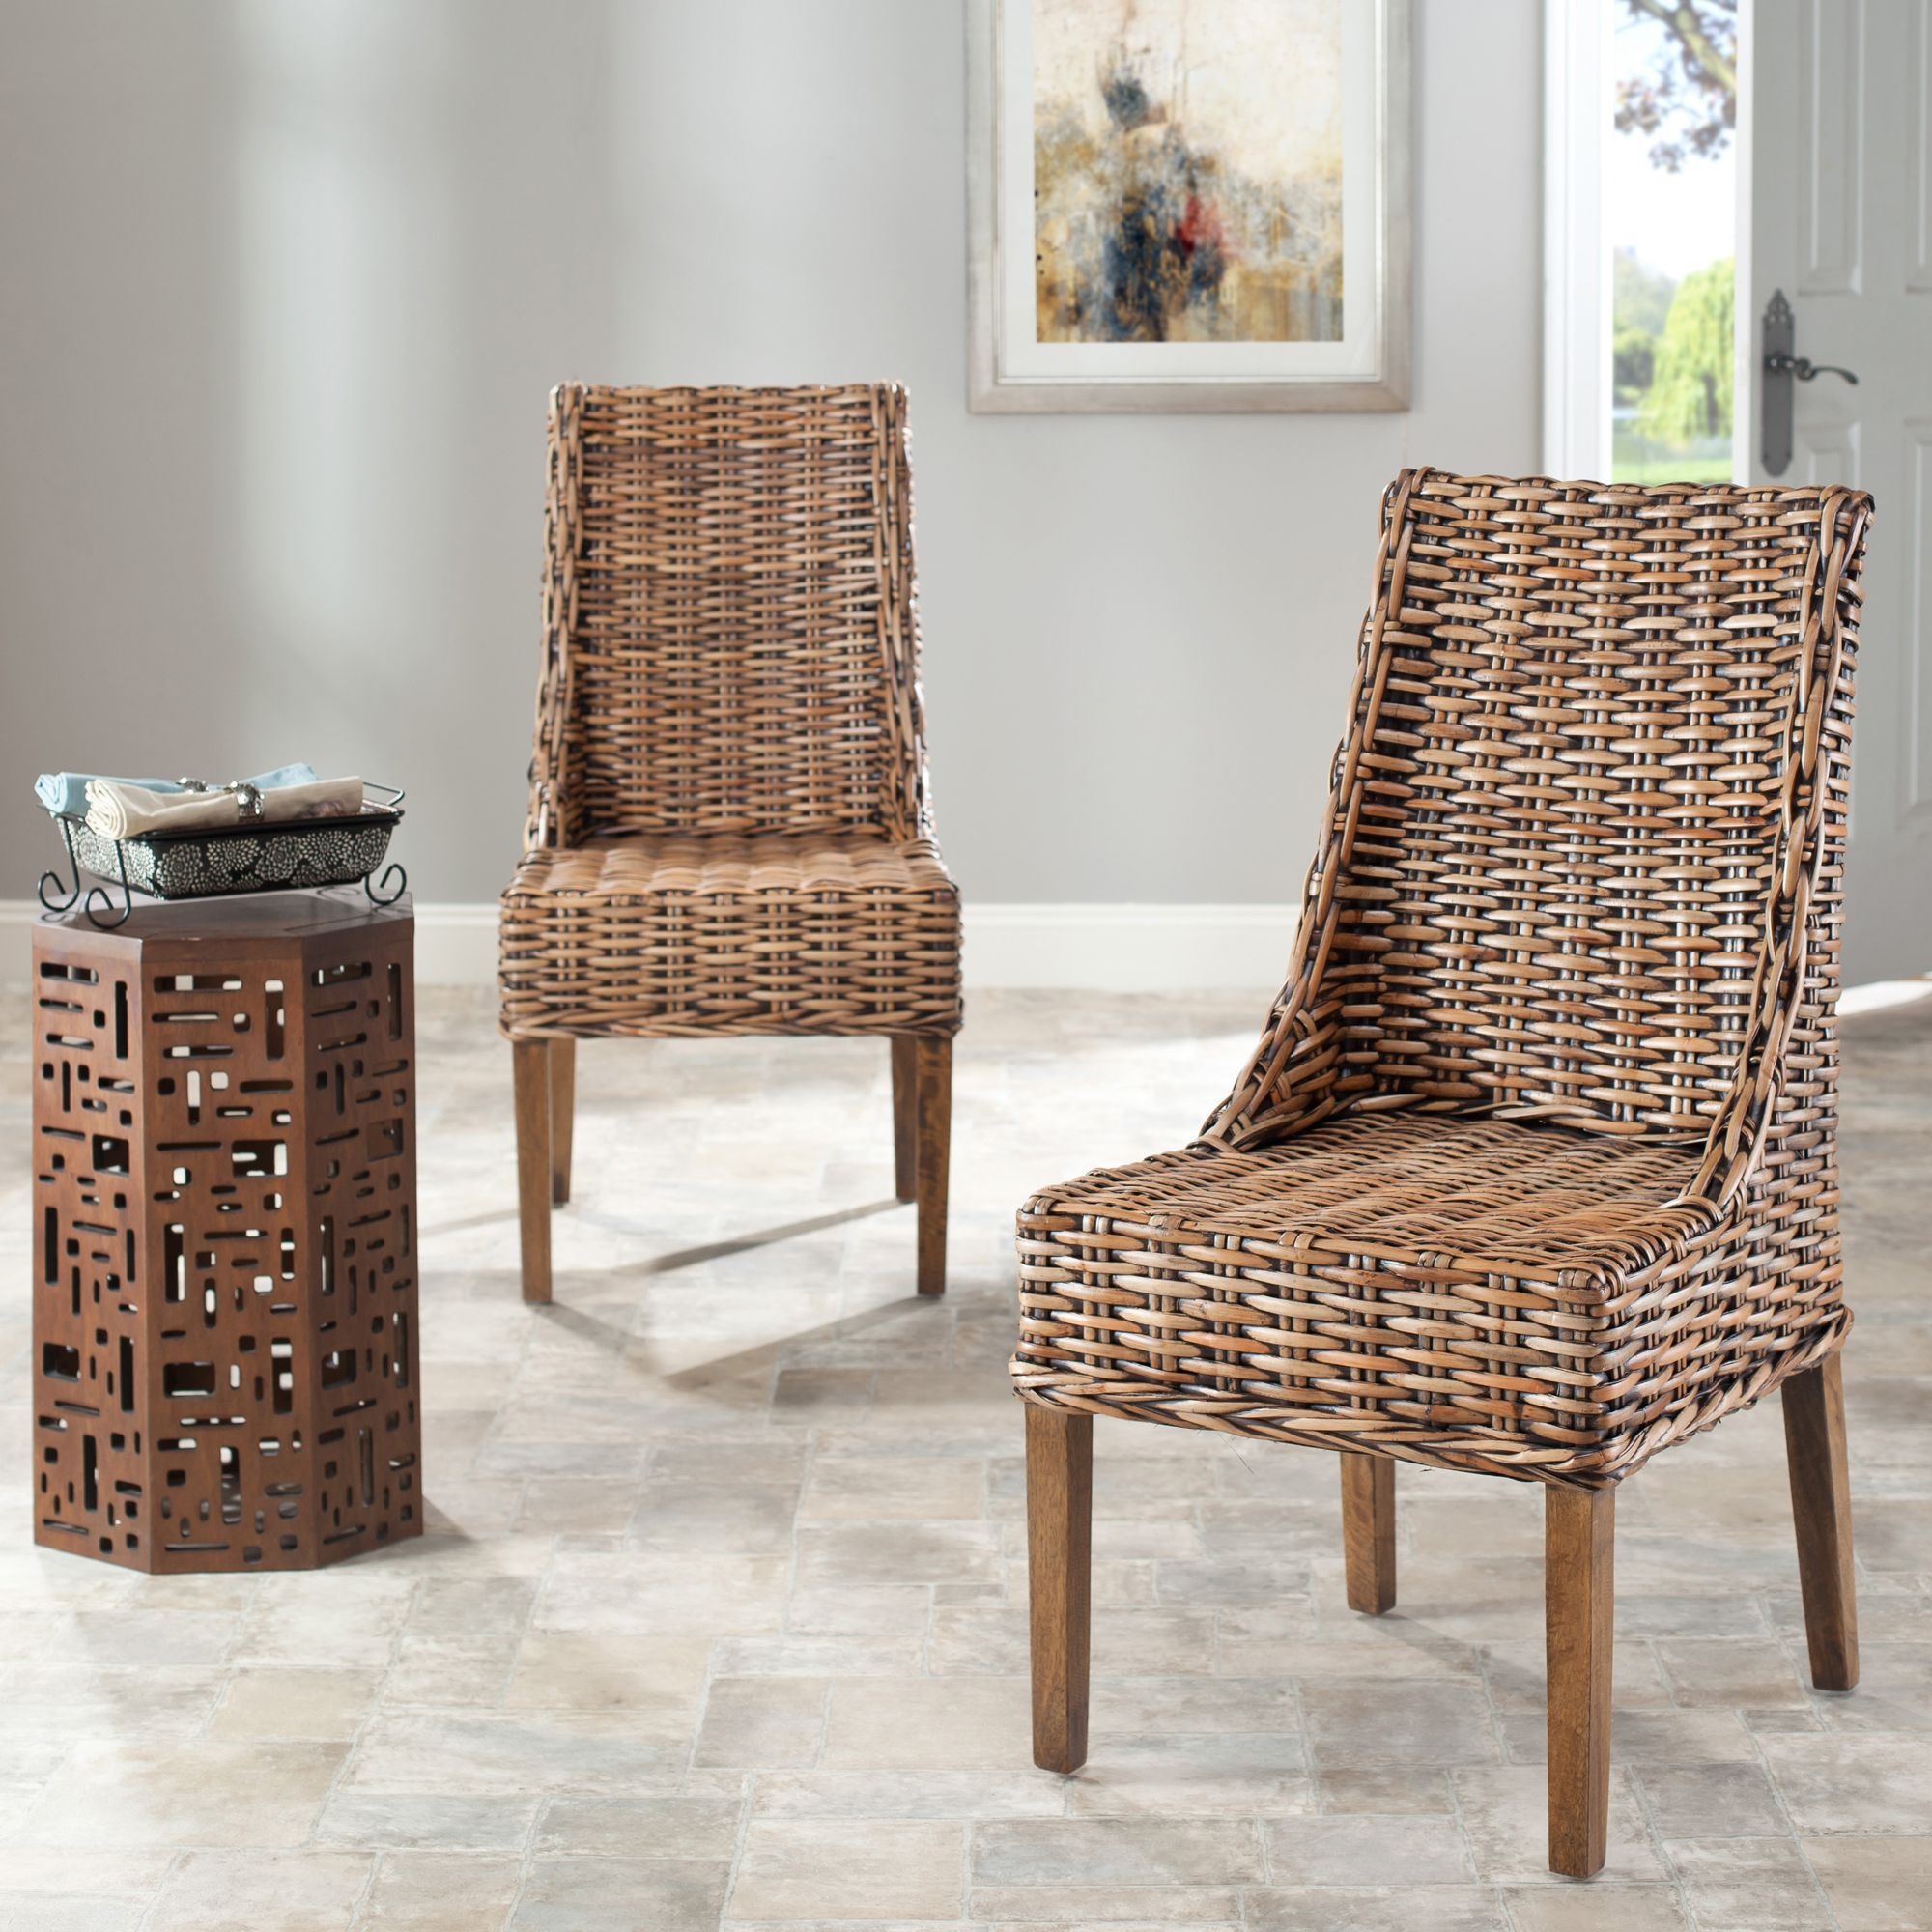 Arm chair set of 2 design featuring beautifully brown wicker